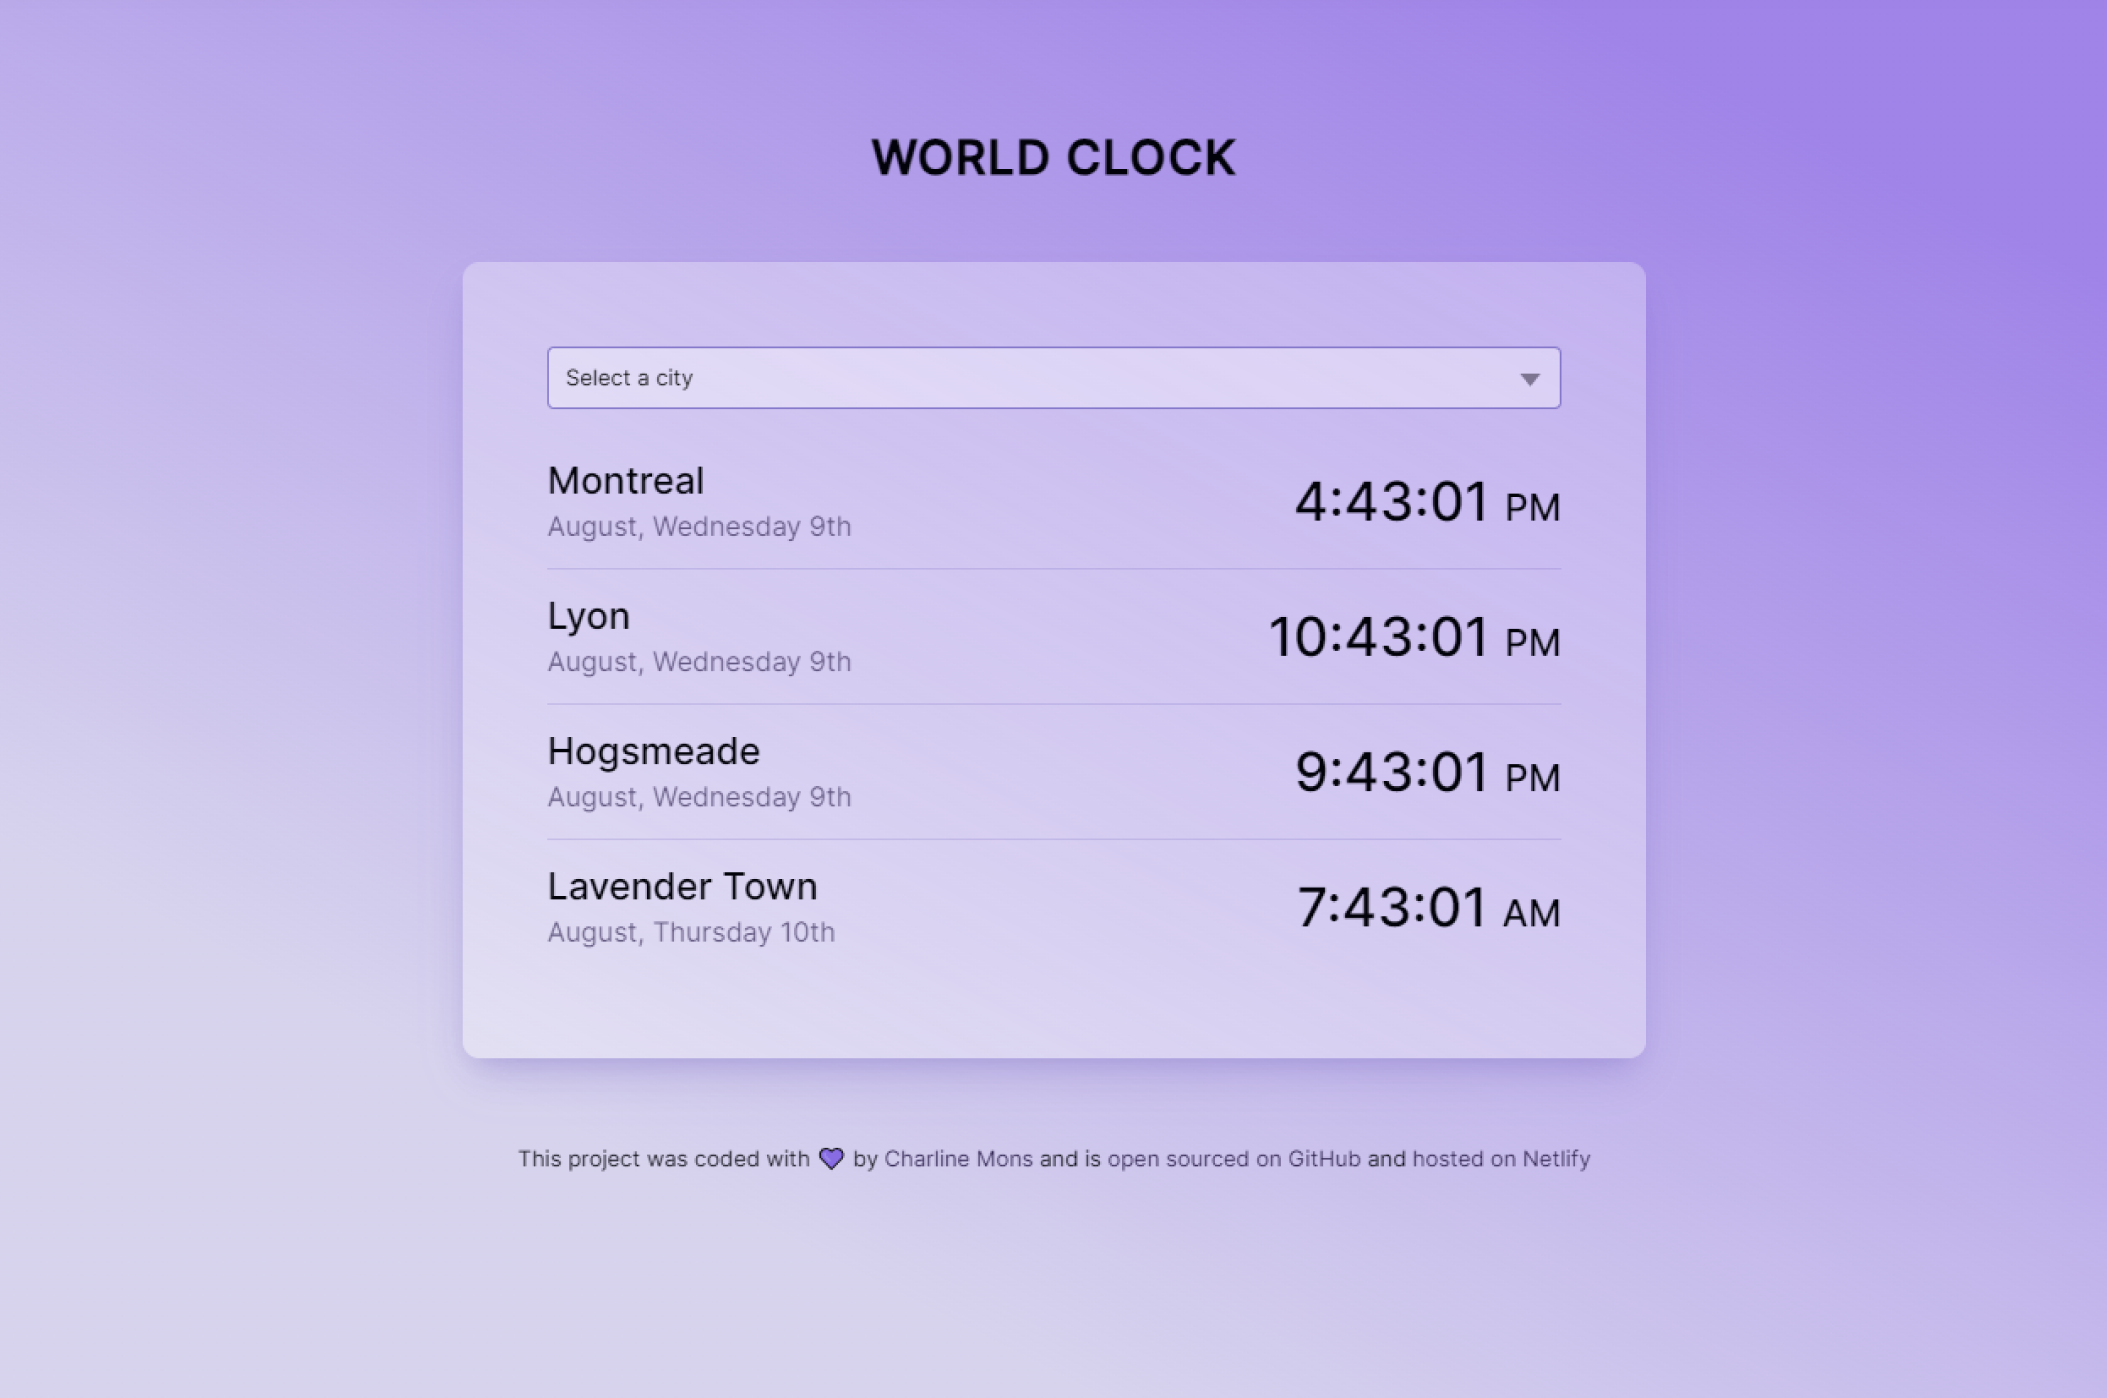 World clock SheCodes Project